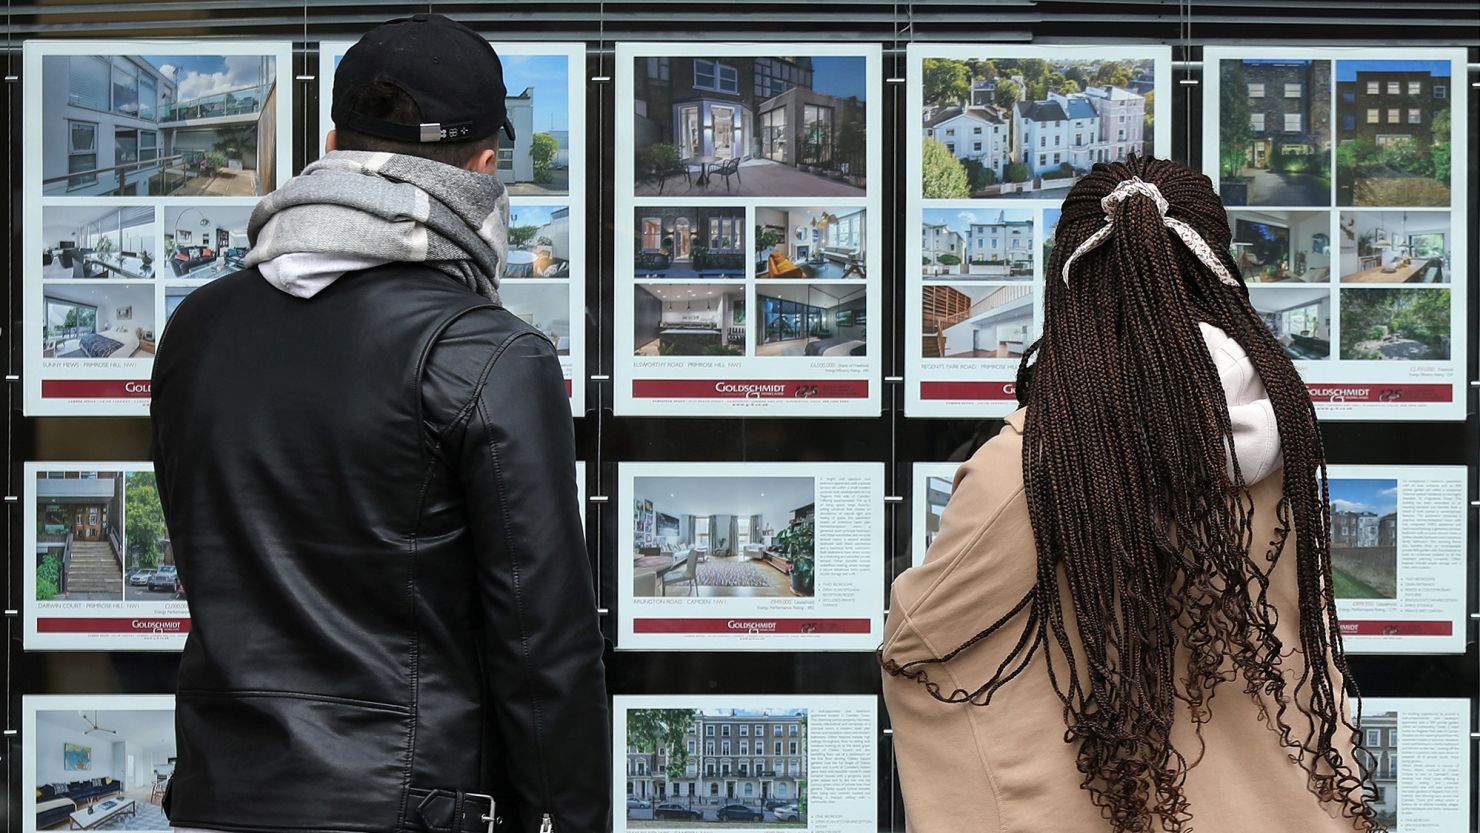 Residential properties for sale displayed in the window of an estate agent in London in September 2022.